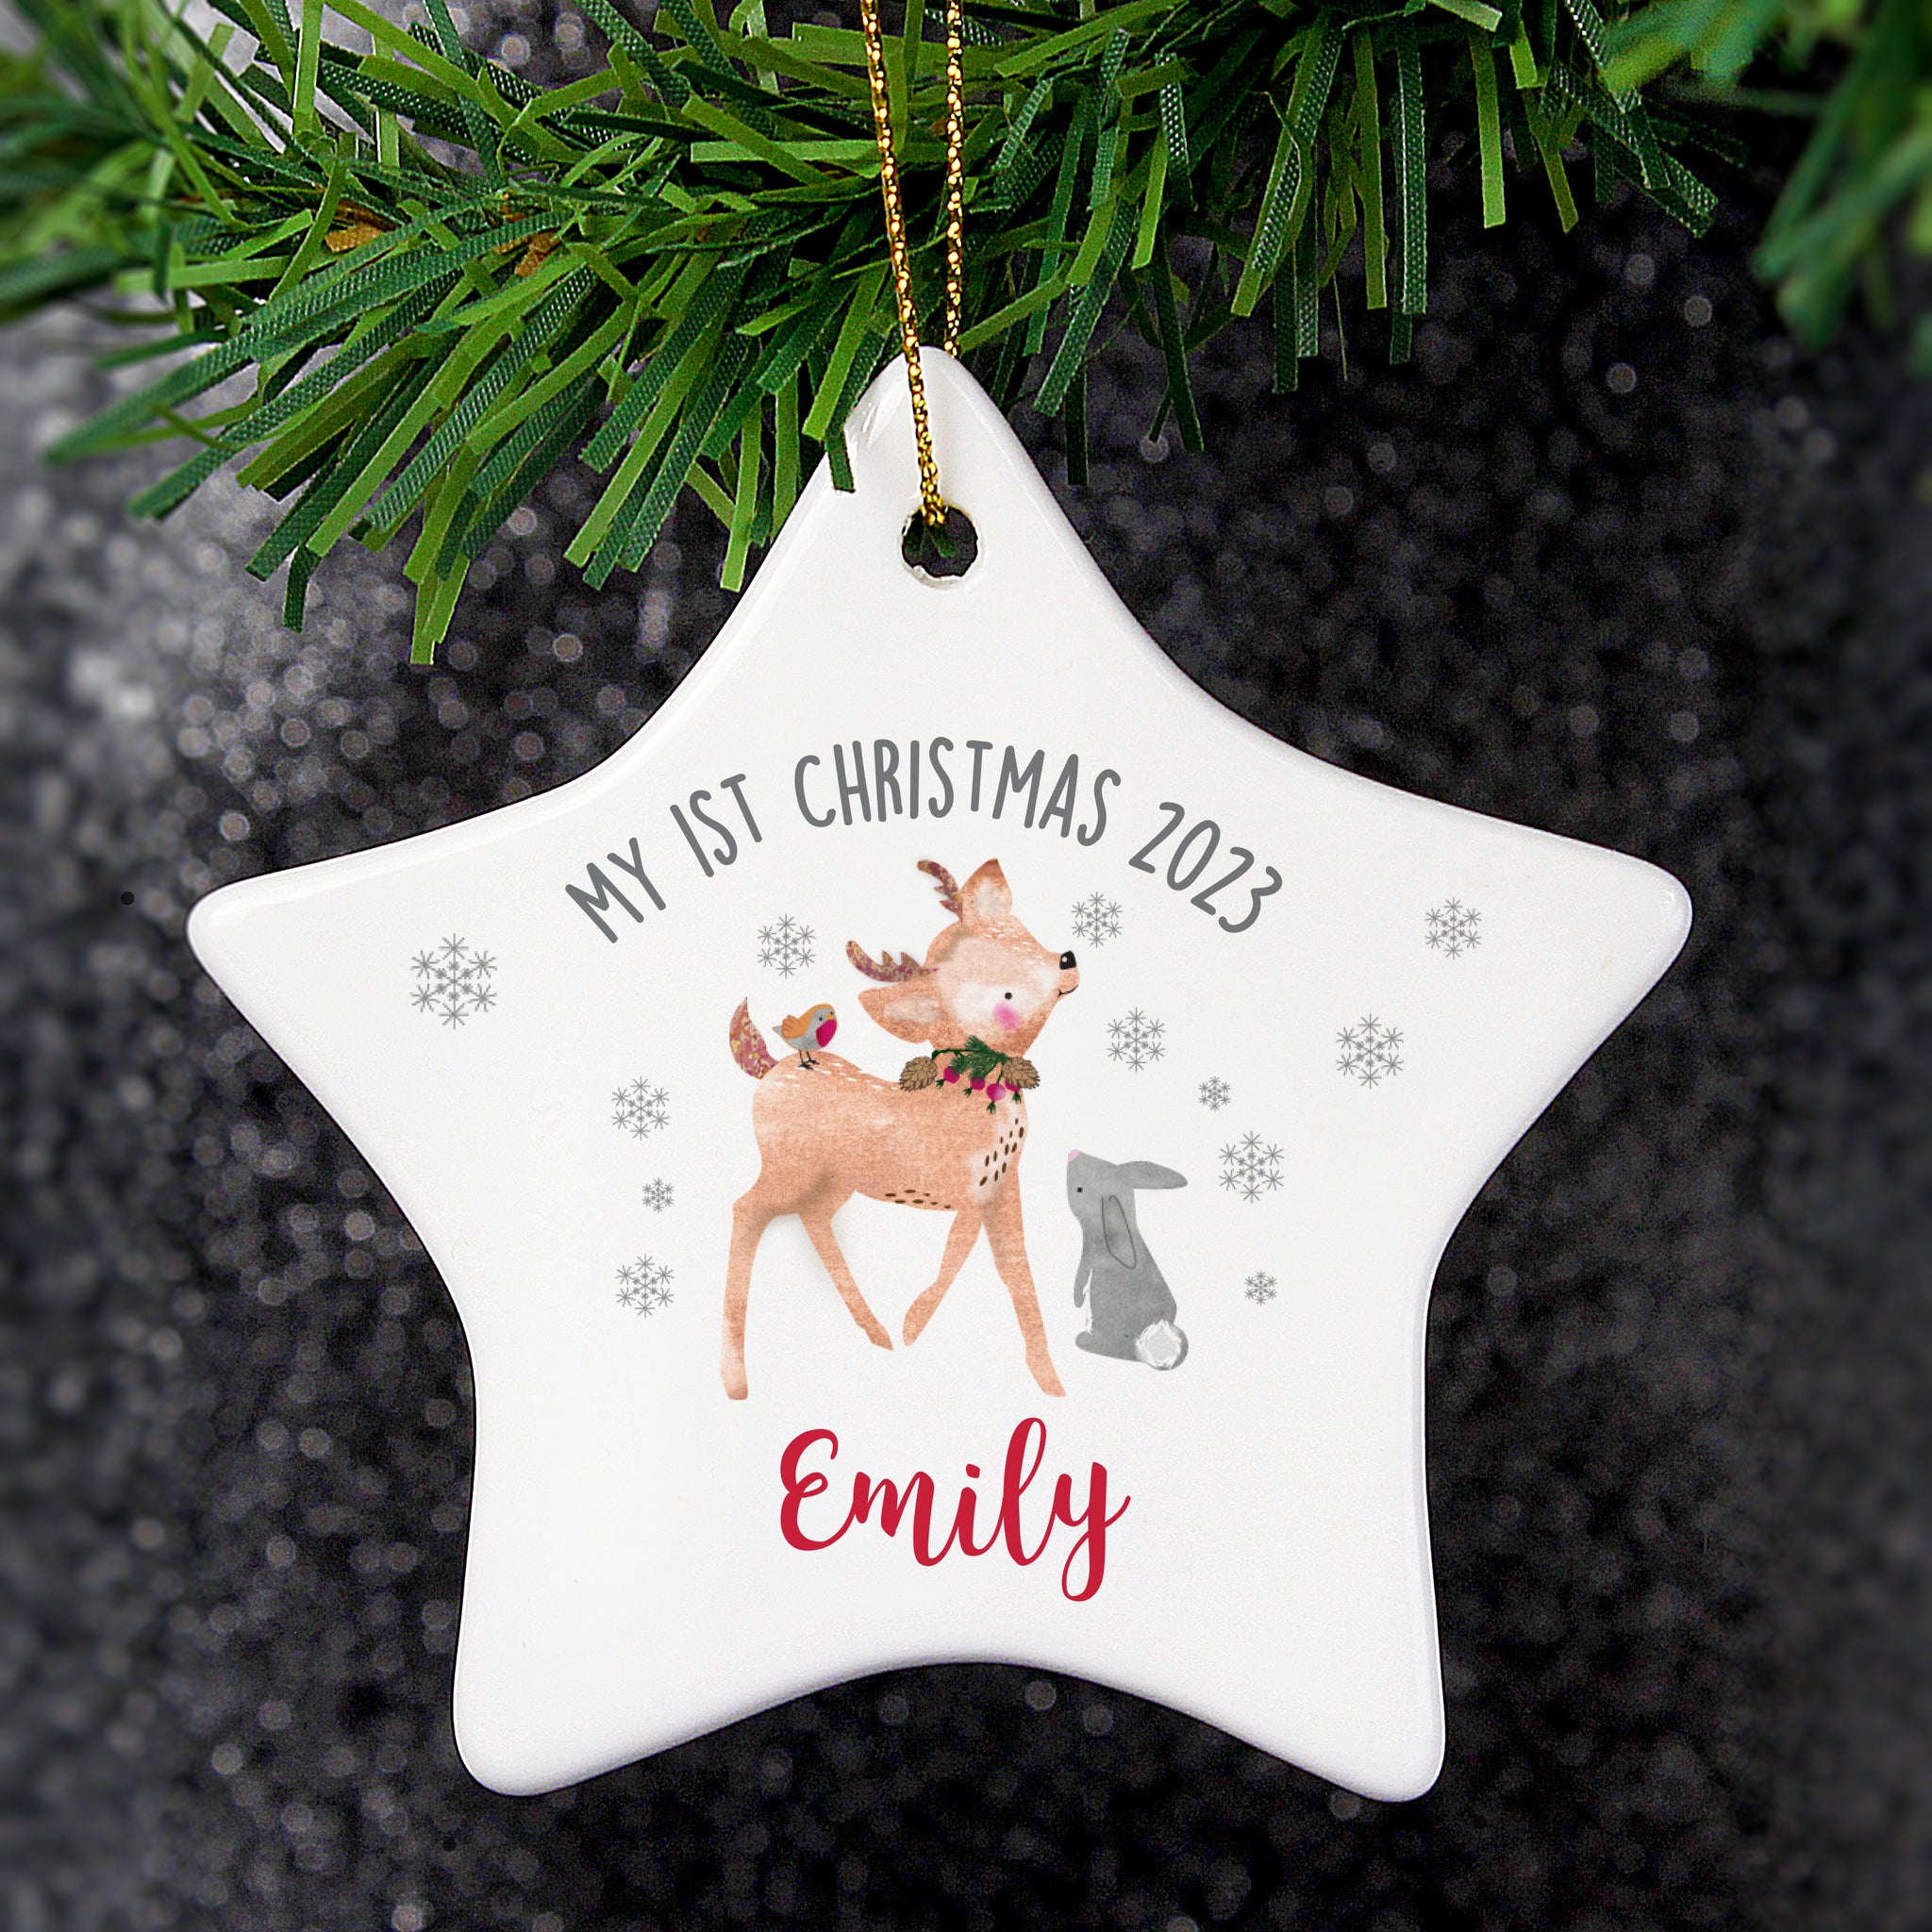 Personalised 1st Christmas Ceramic Star Decoration with Festive Fawn Design